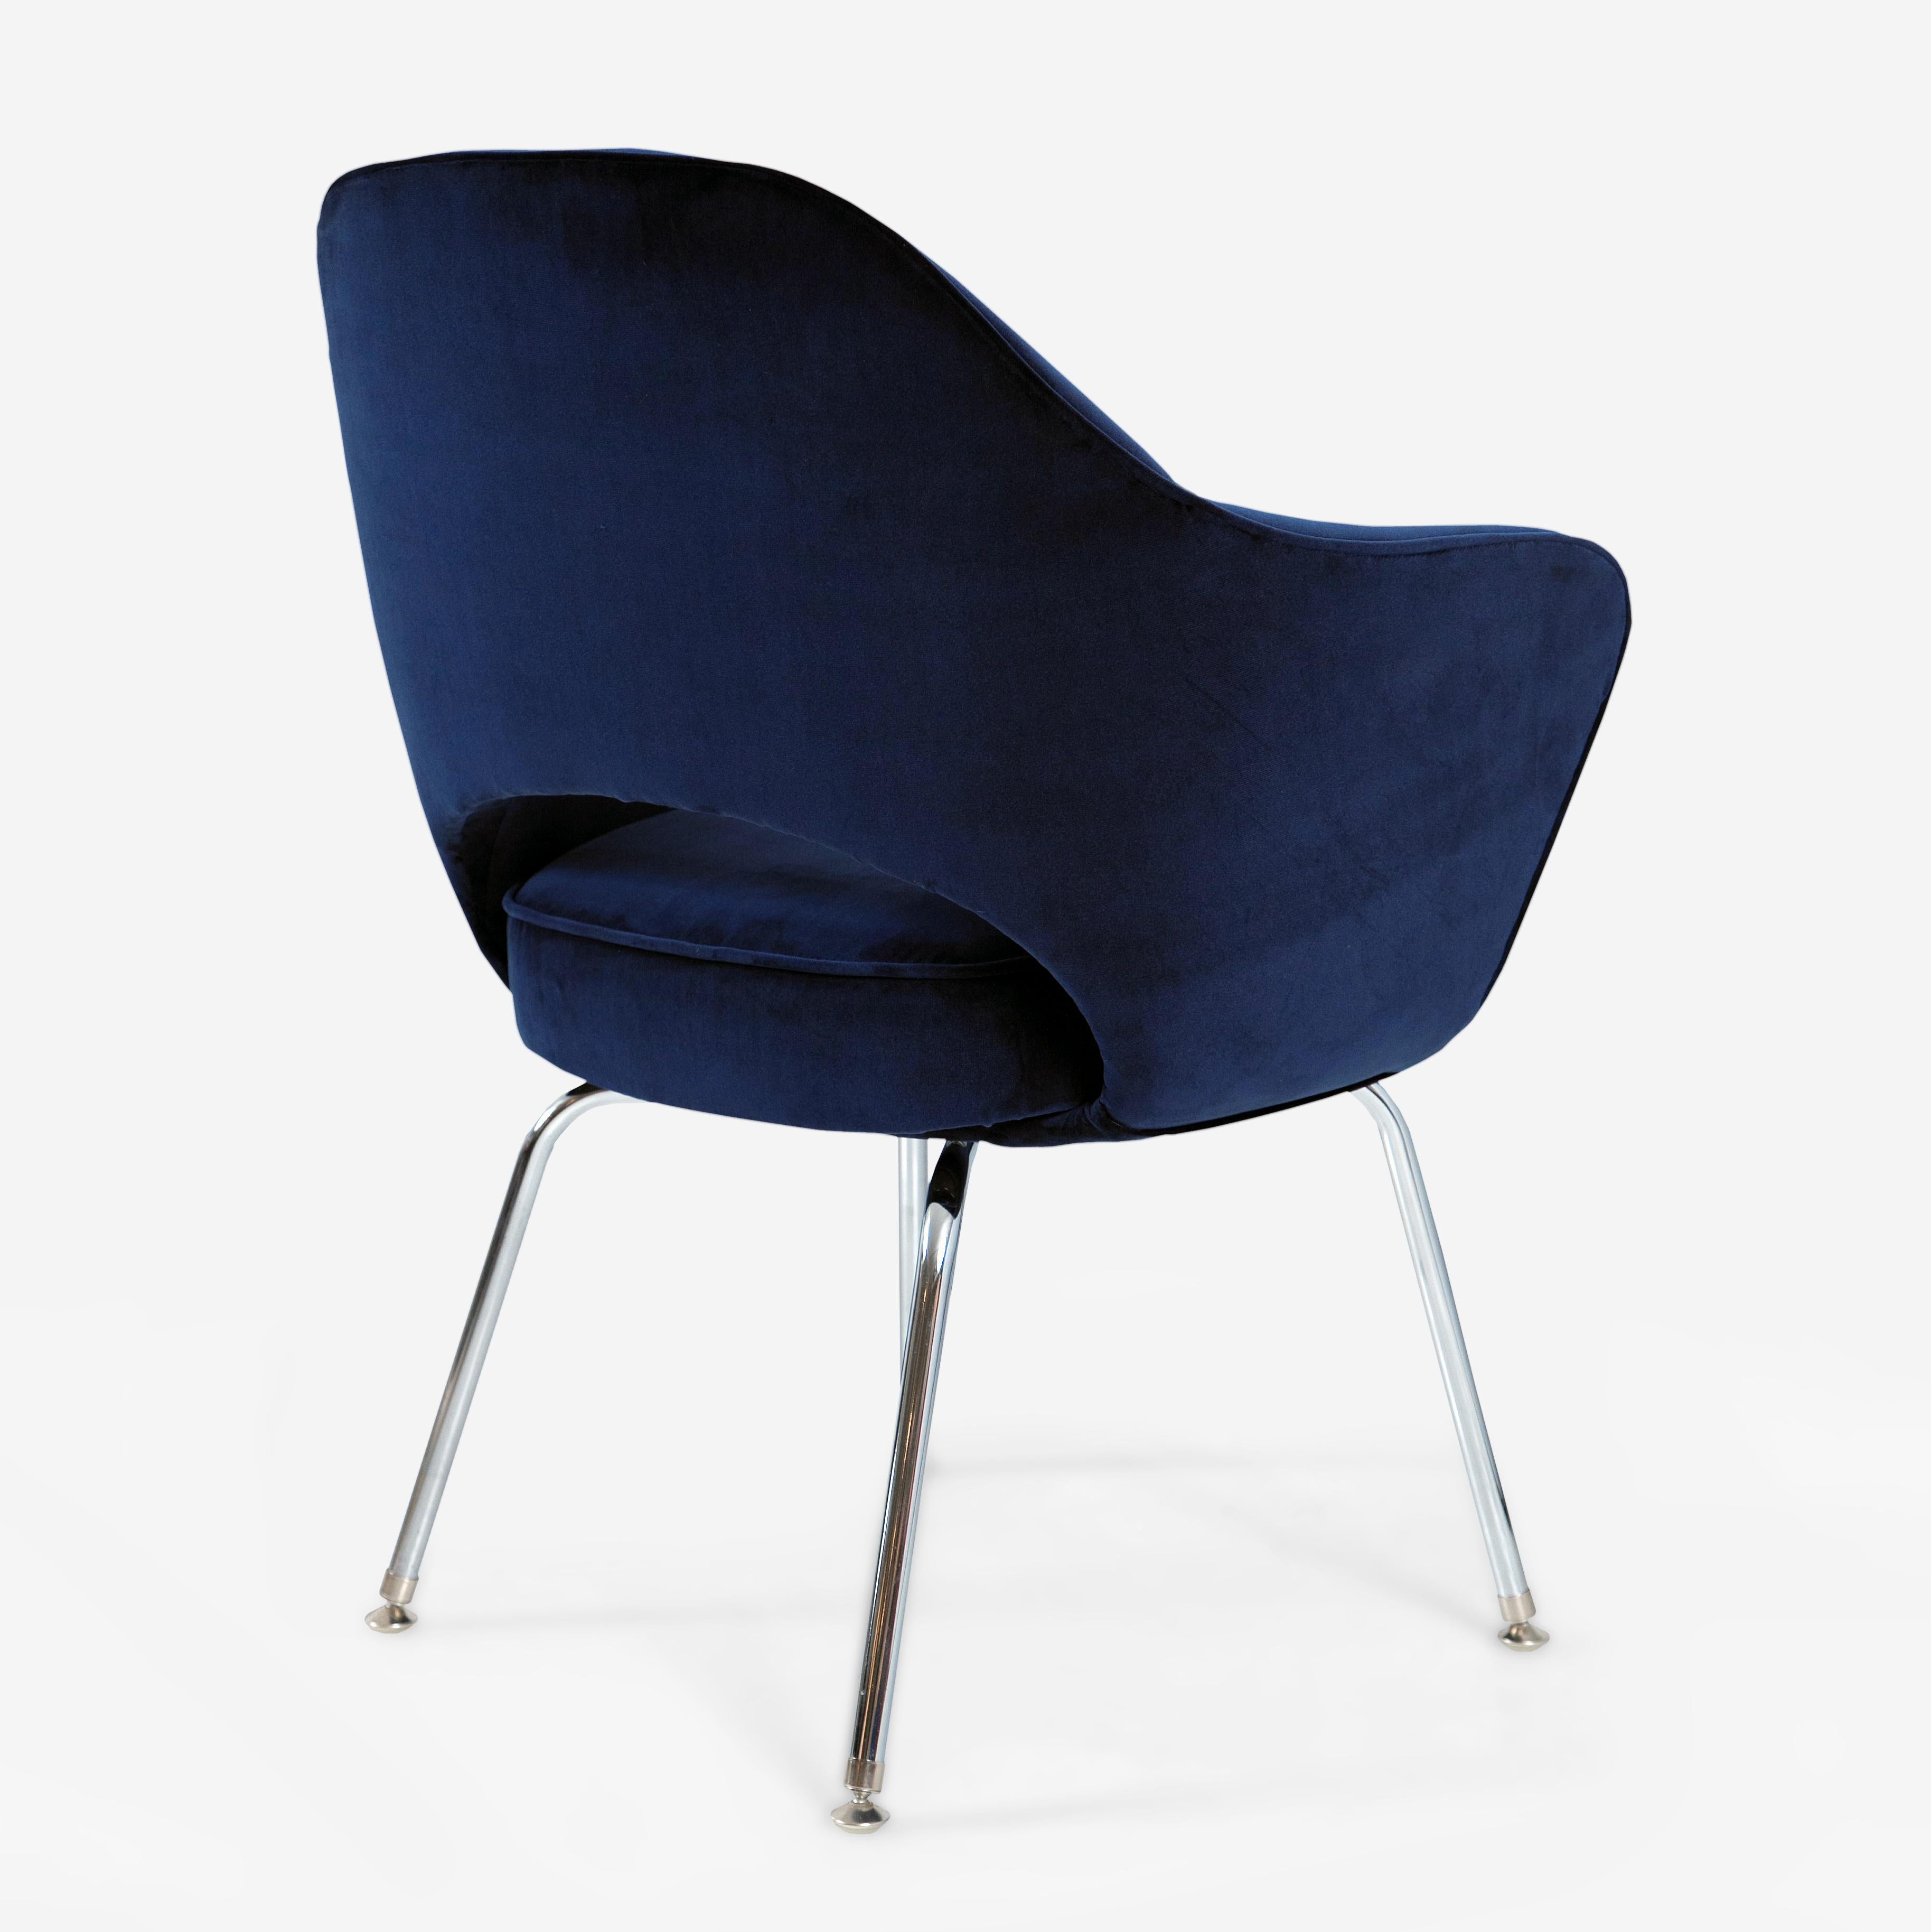 The mid-century Classic vintage Eero Saarinen Executive Armchair, manufactured by Knoll Furniture and custom upholstered in a deep 100% cotton Italian Velvet in stunning Royal Blue. All restoration is executed in line with original specifications.